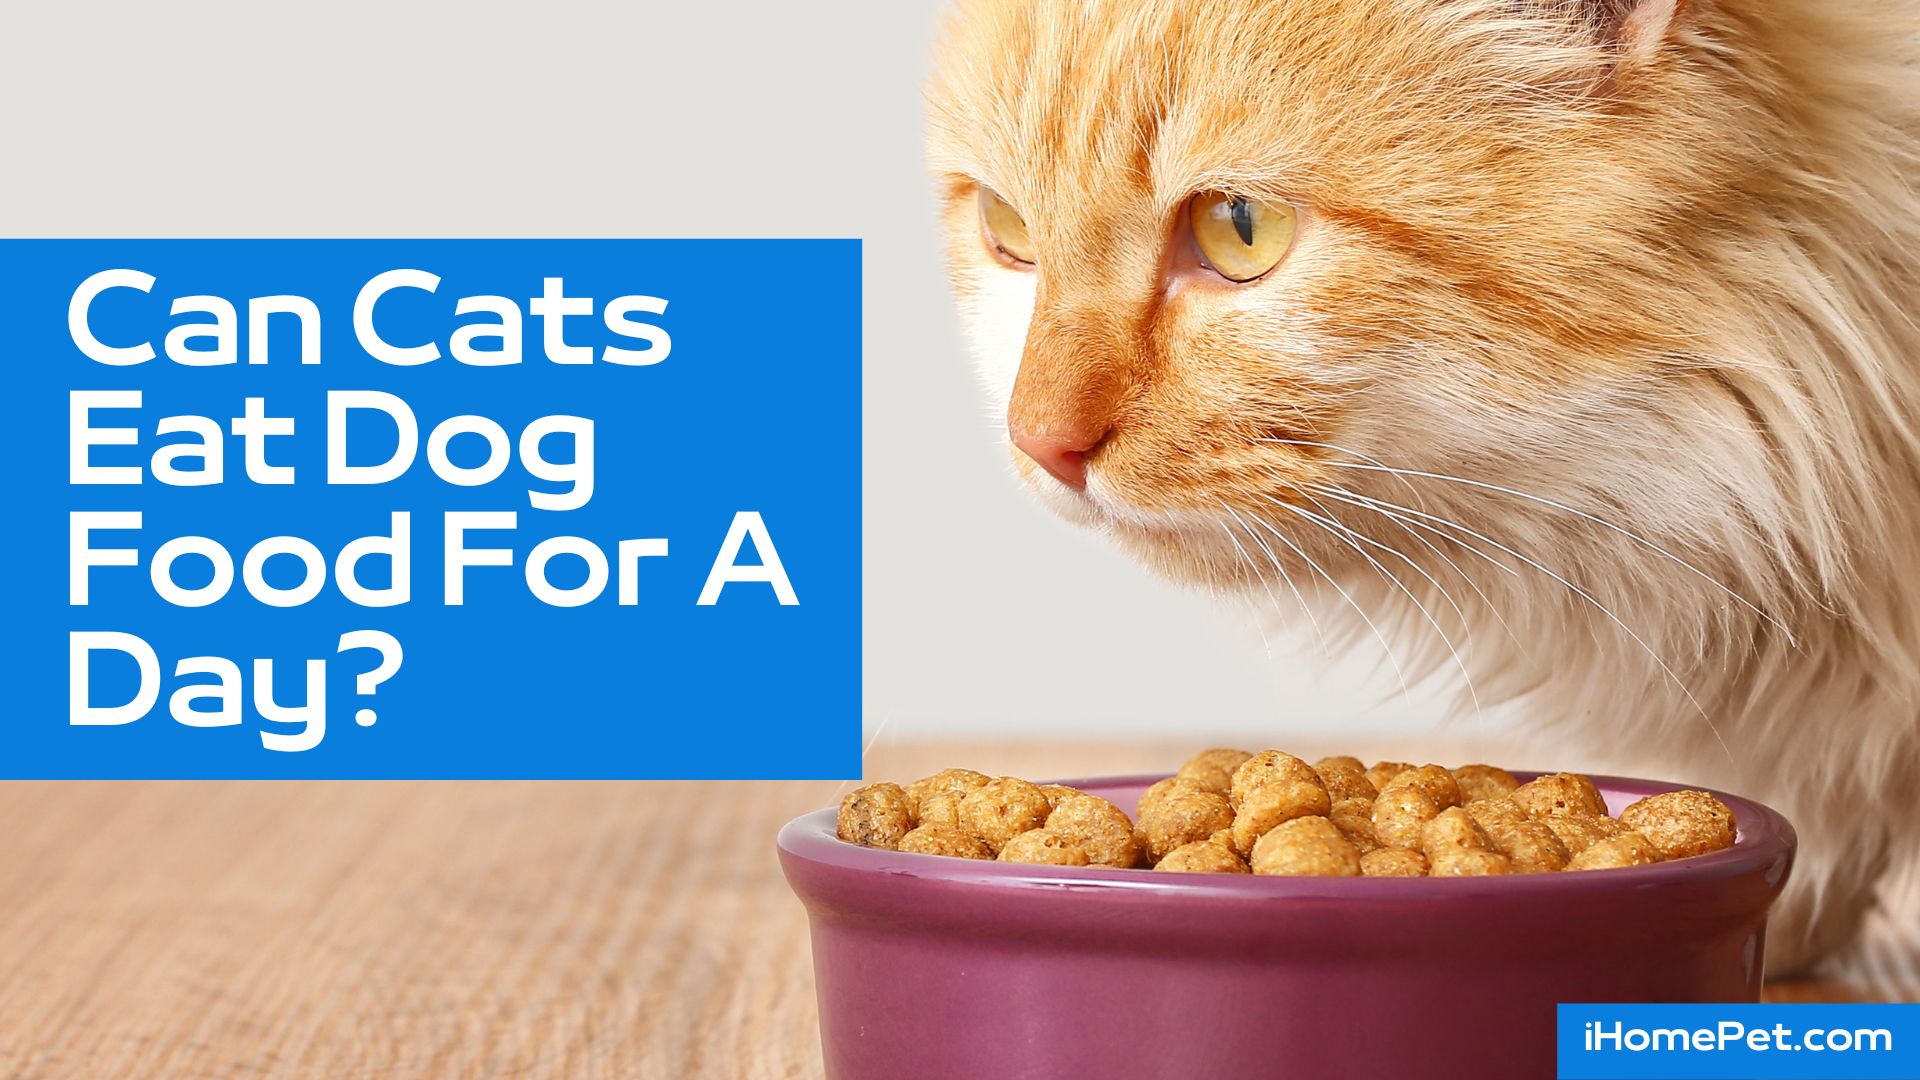 Feed your own food to improve cat nutrition and boost the overall pet health